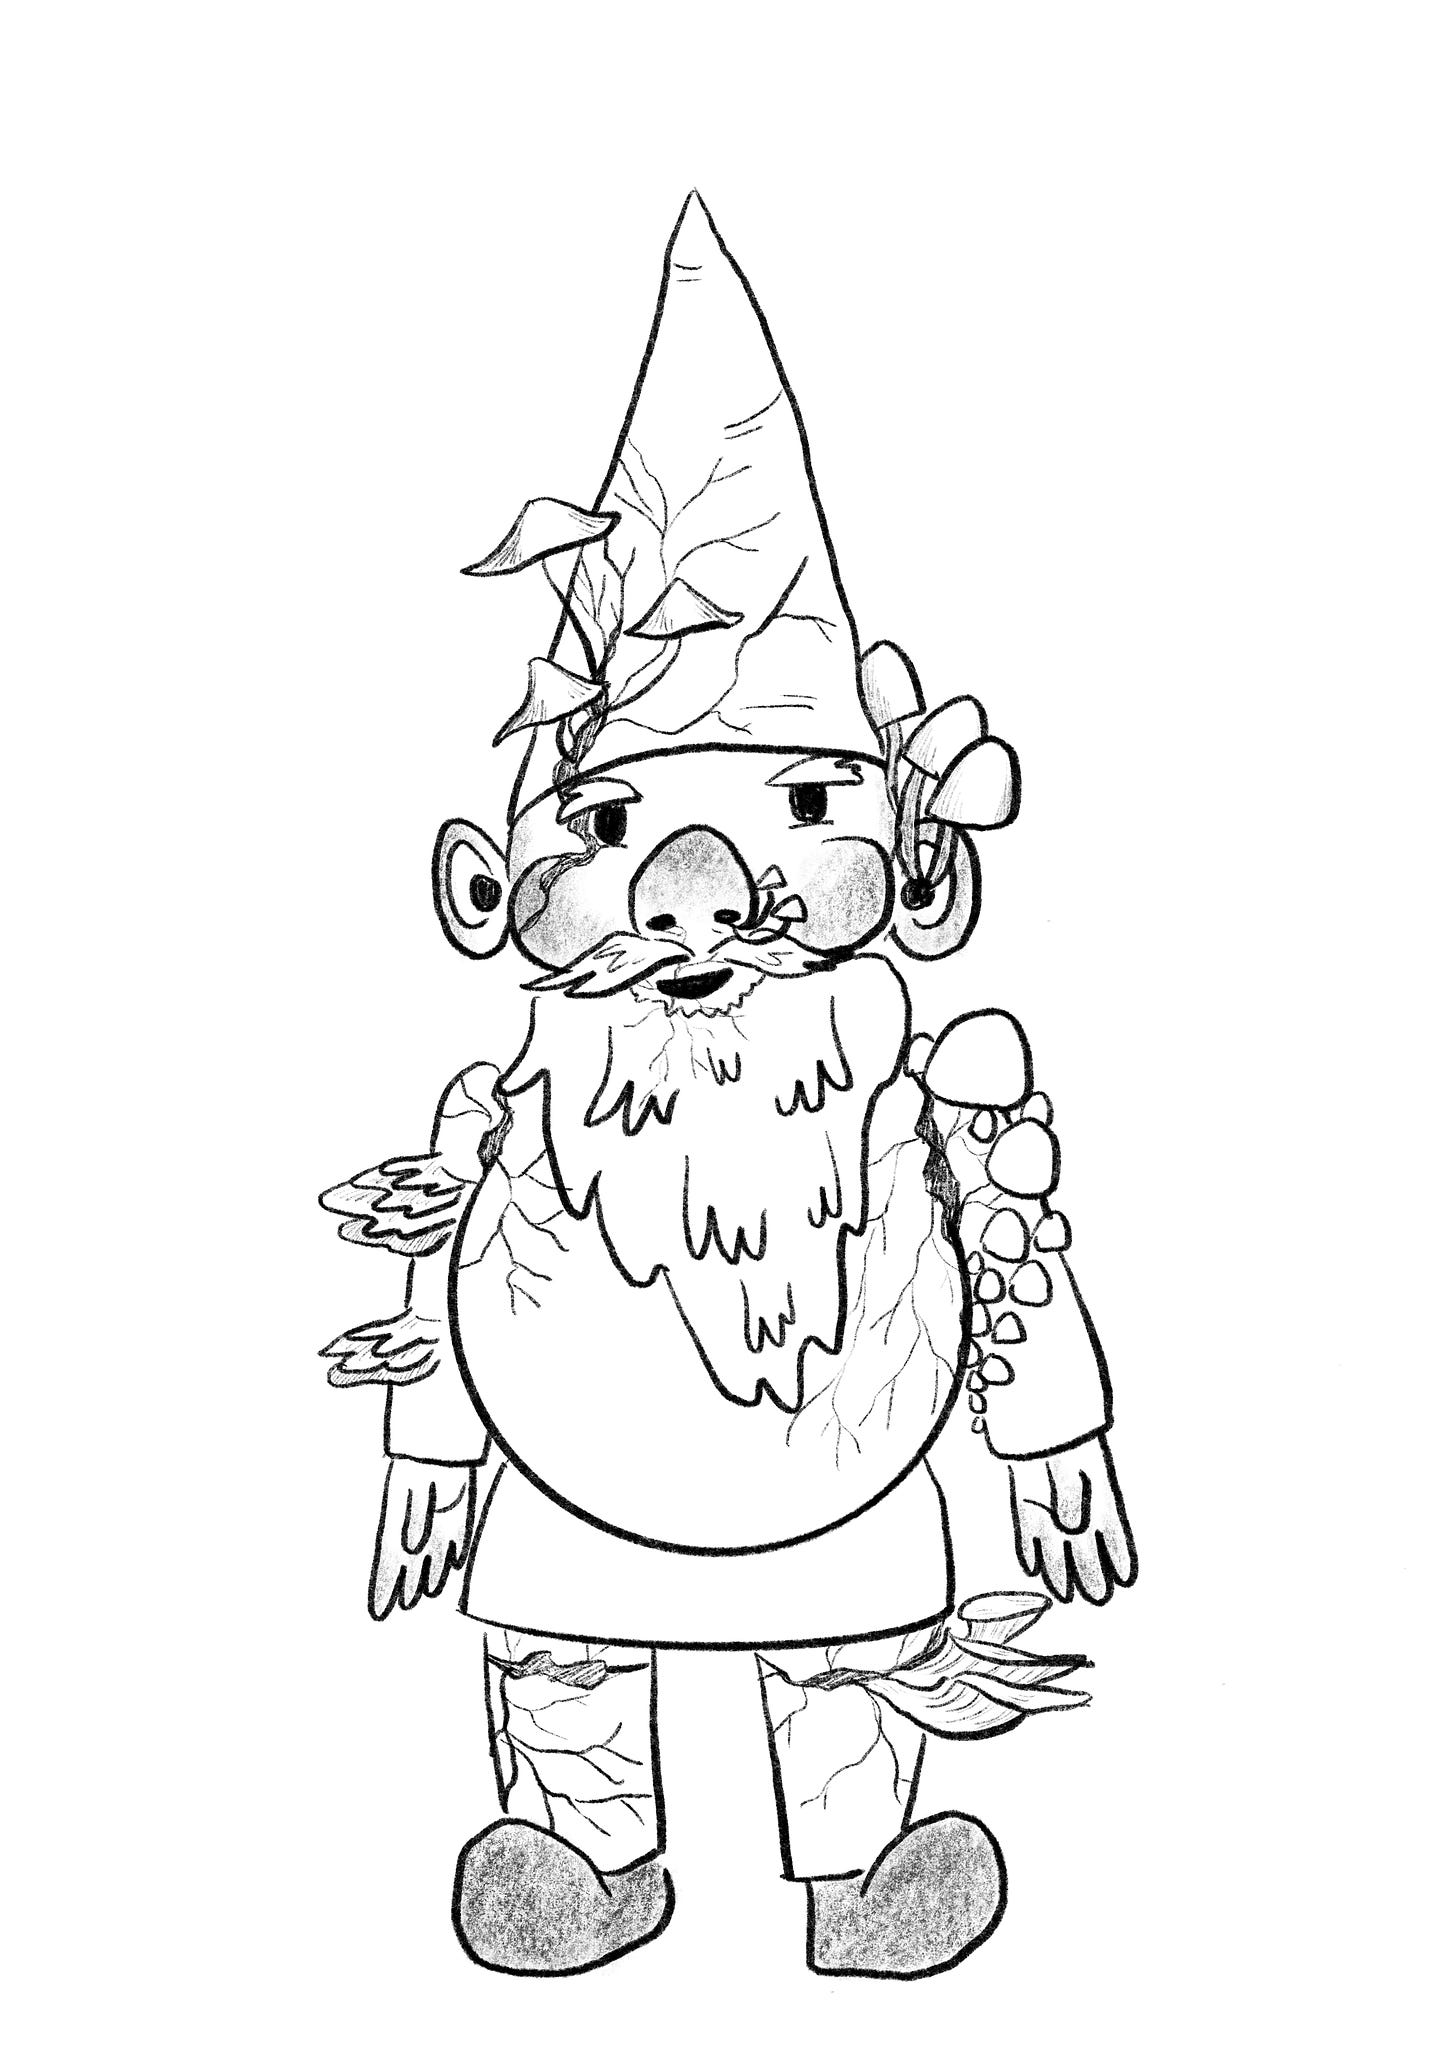 Lineart illustration of a garden gnome with mushrooms growing along cracks in the joints between the body, limbs, and head.